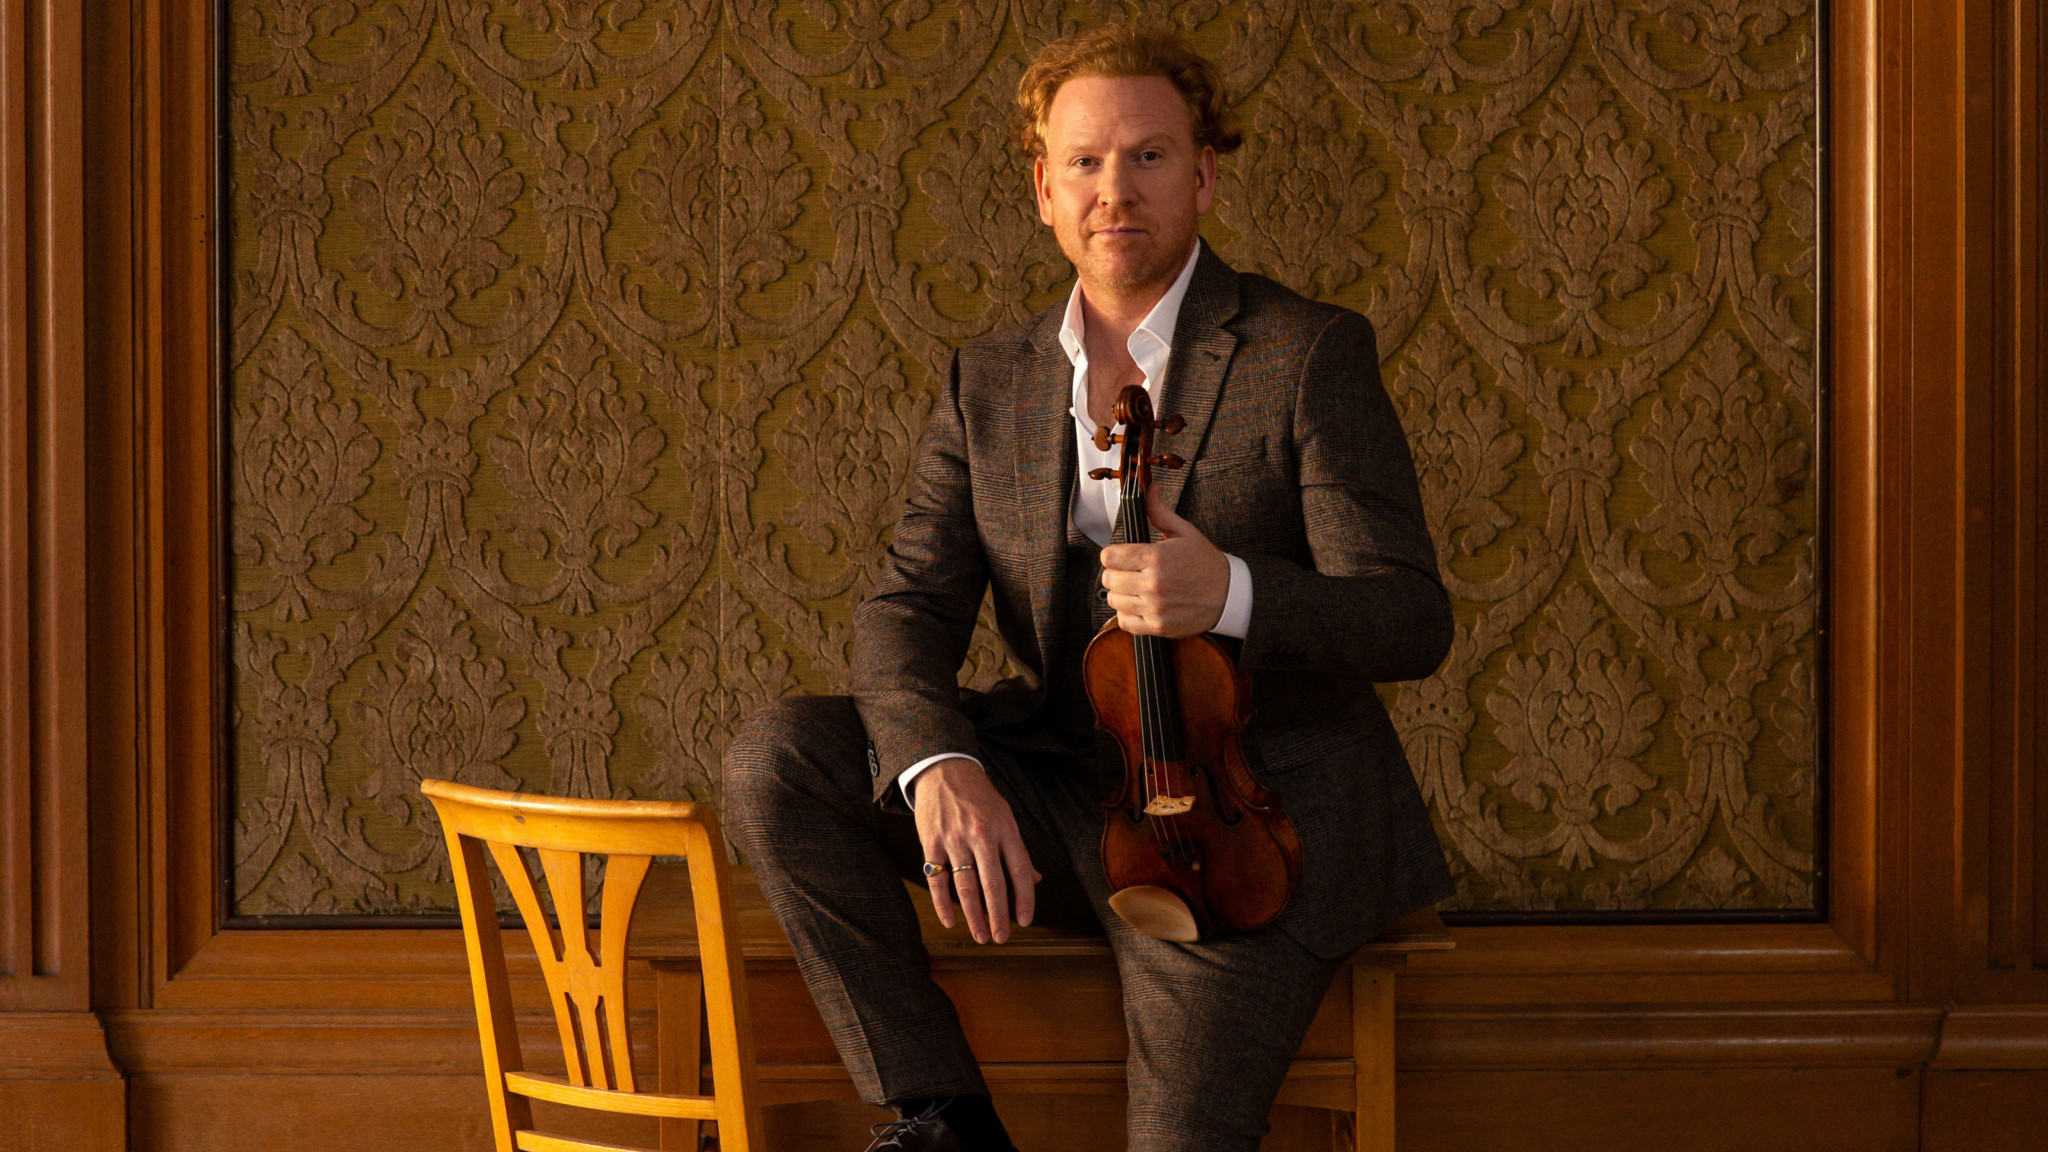 Hope@Home - Daniel Hope's final concert this Sunday May 3 features special guest Max Richter